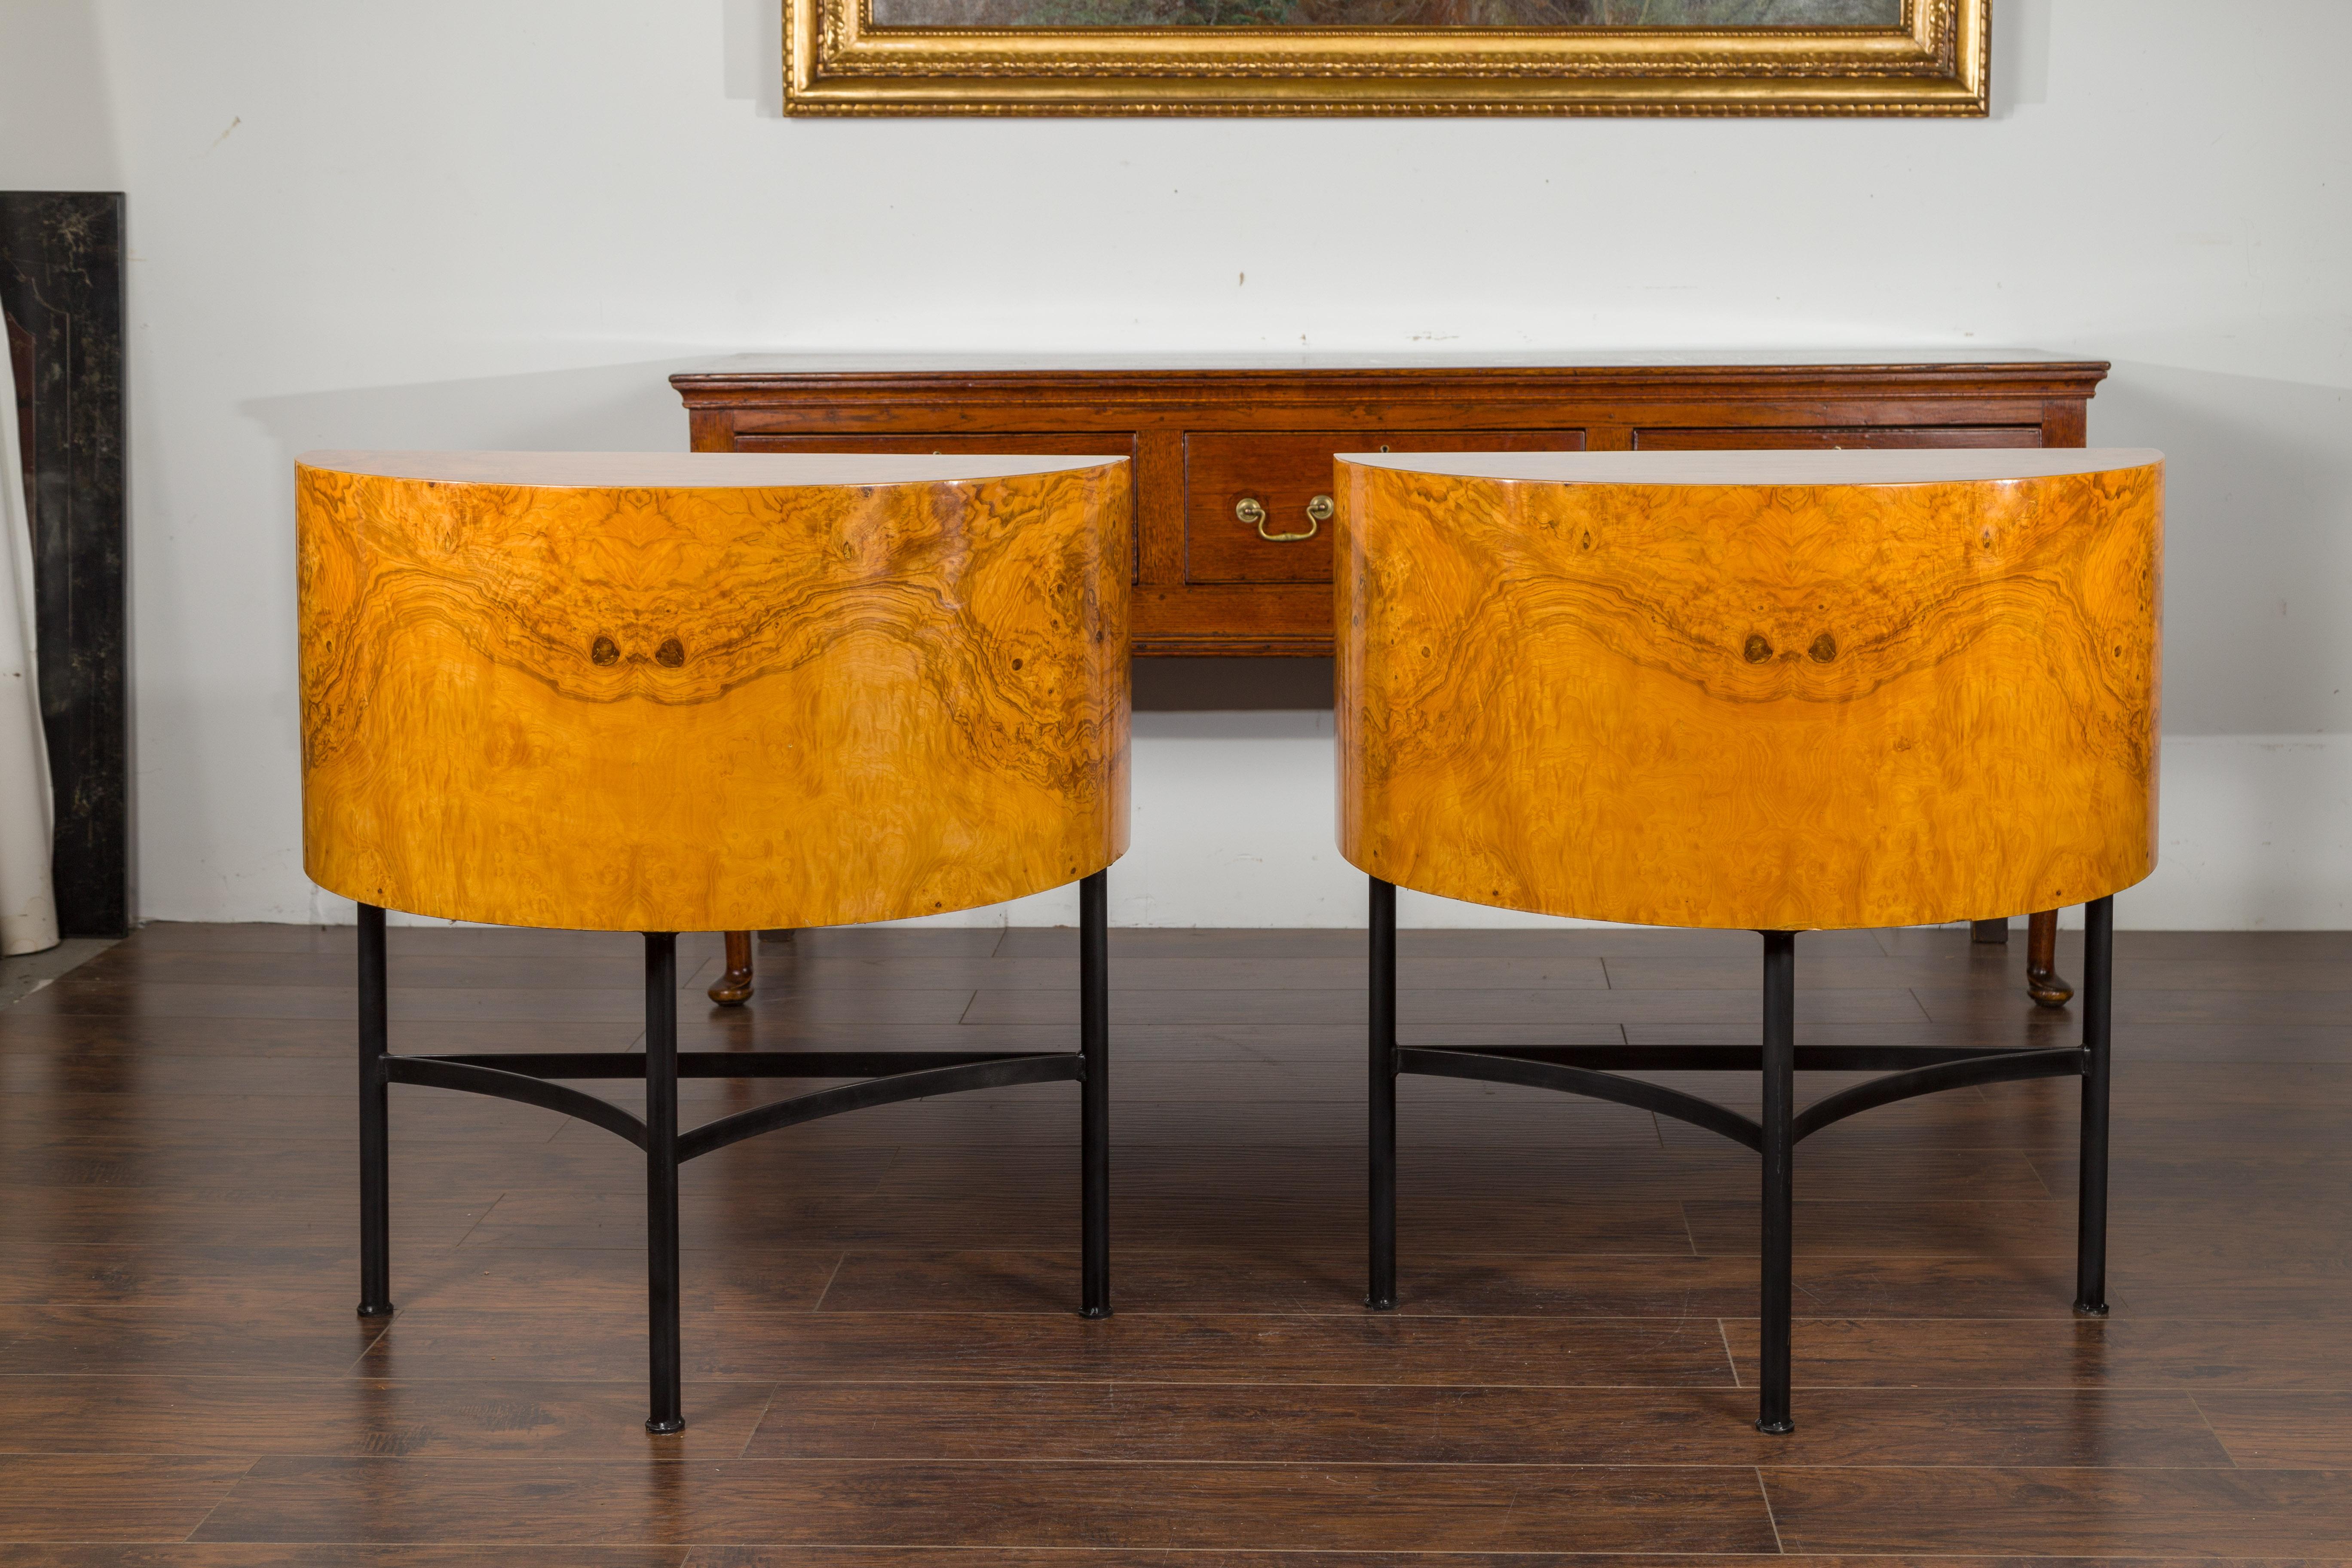 A pair of Italian vintage demilune tables from the mid-20th century, on custom iron bases. Created in Italy during the midcentury period, each of this pair of stylish demilunes features a semi-circular shape perfectly complimented by an exquisite